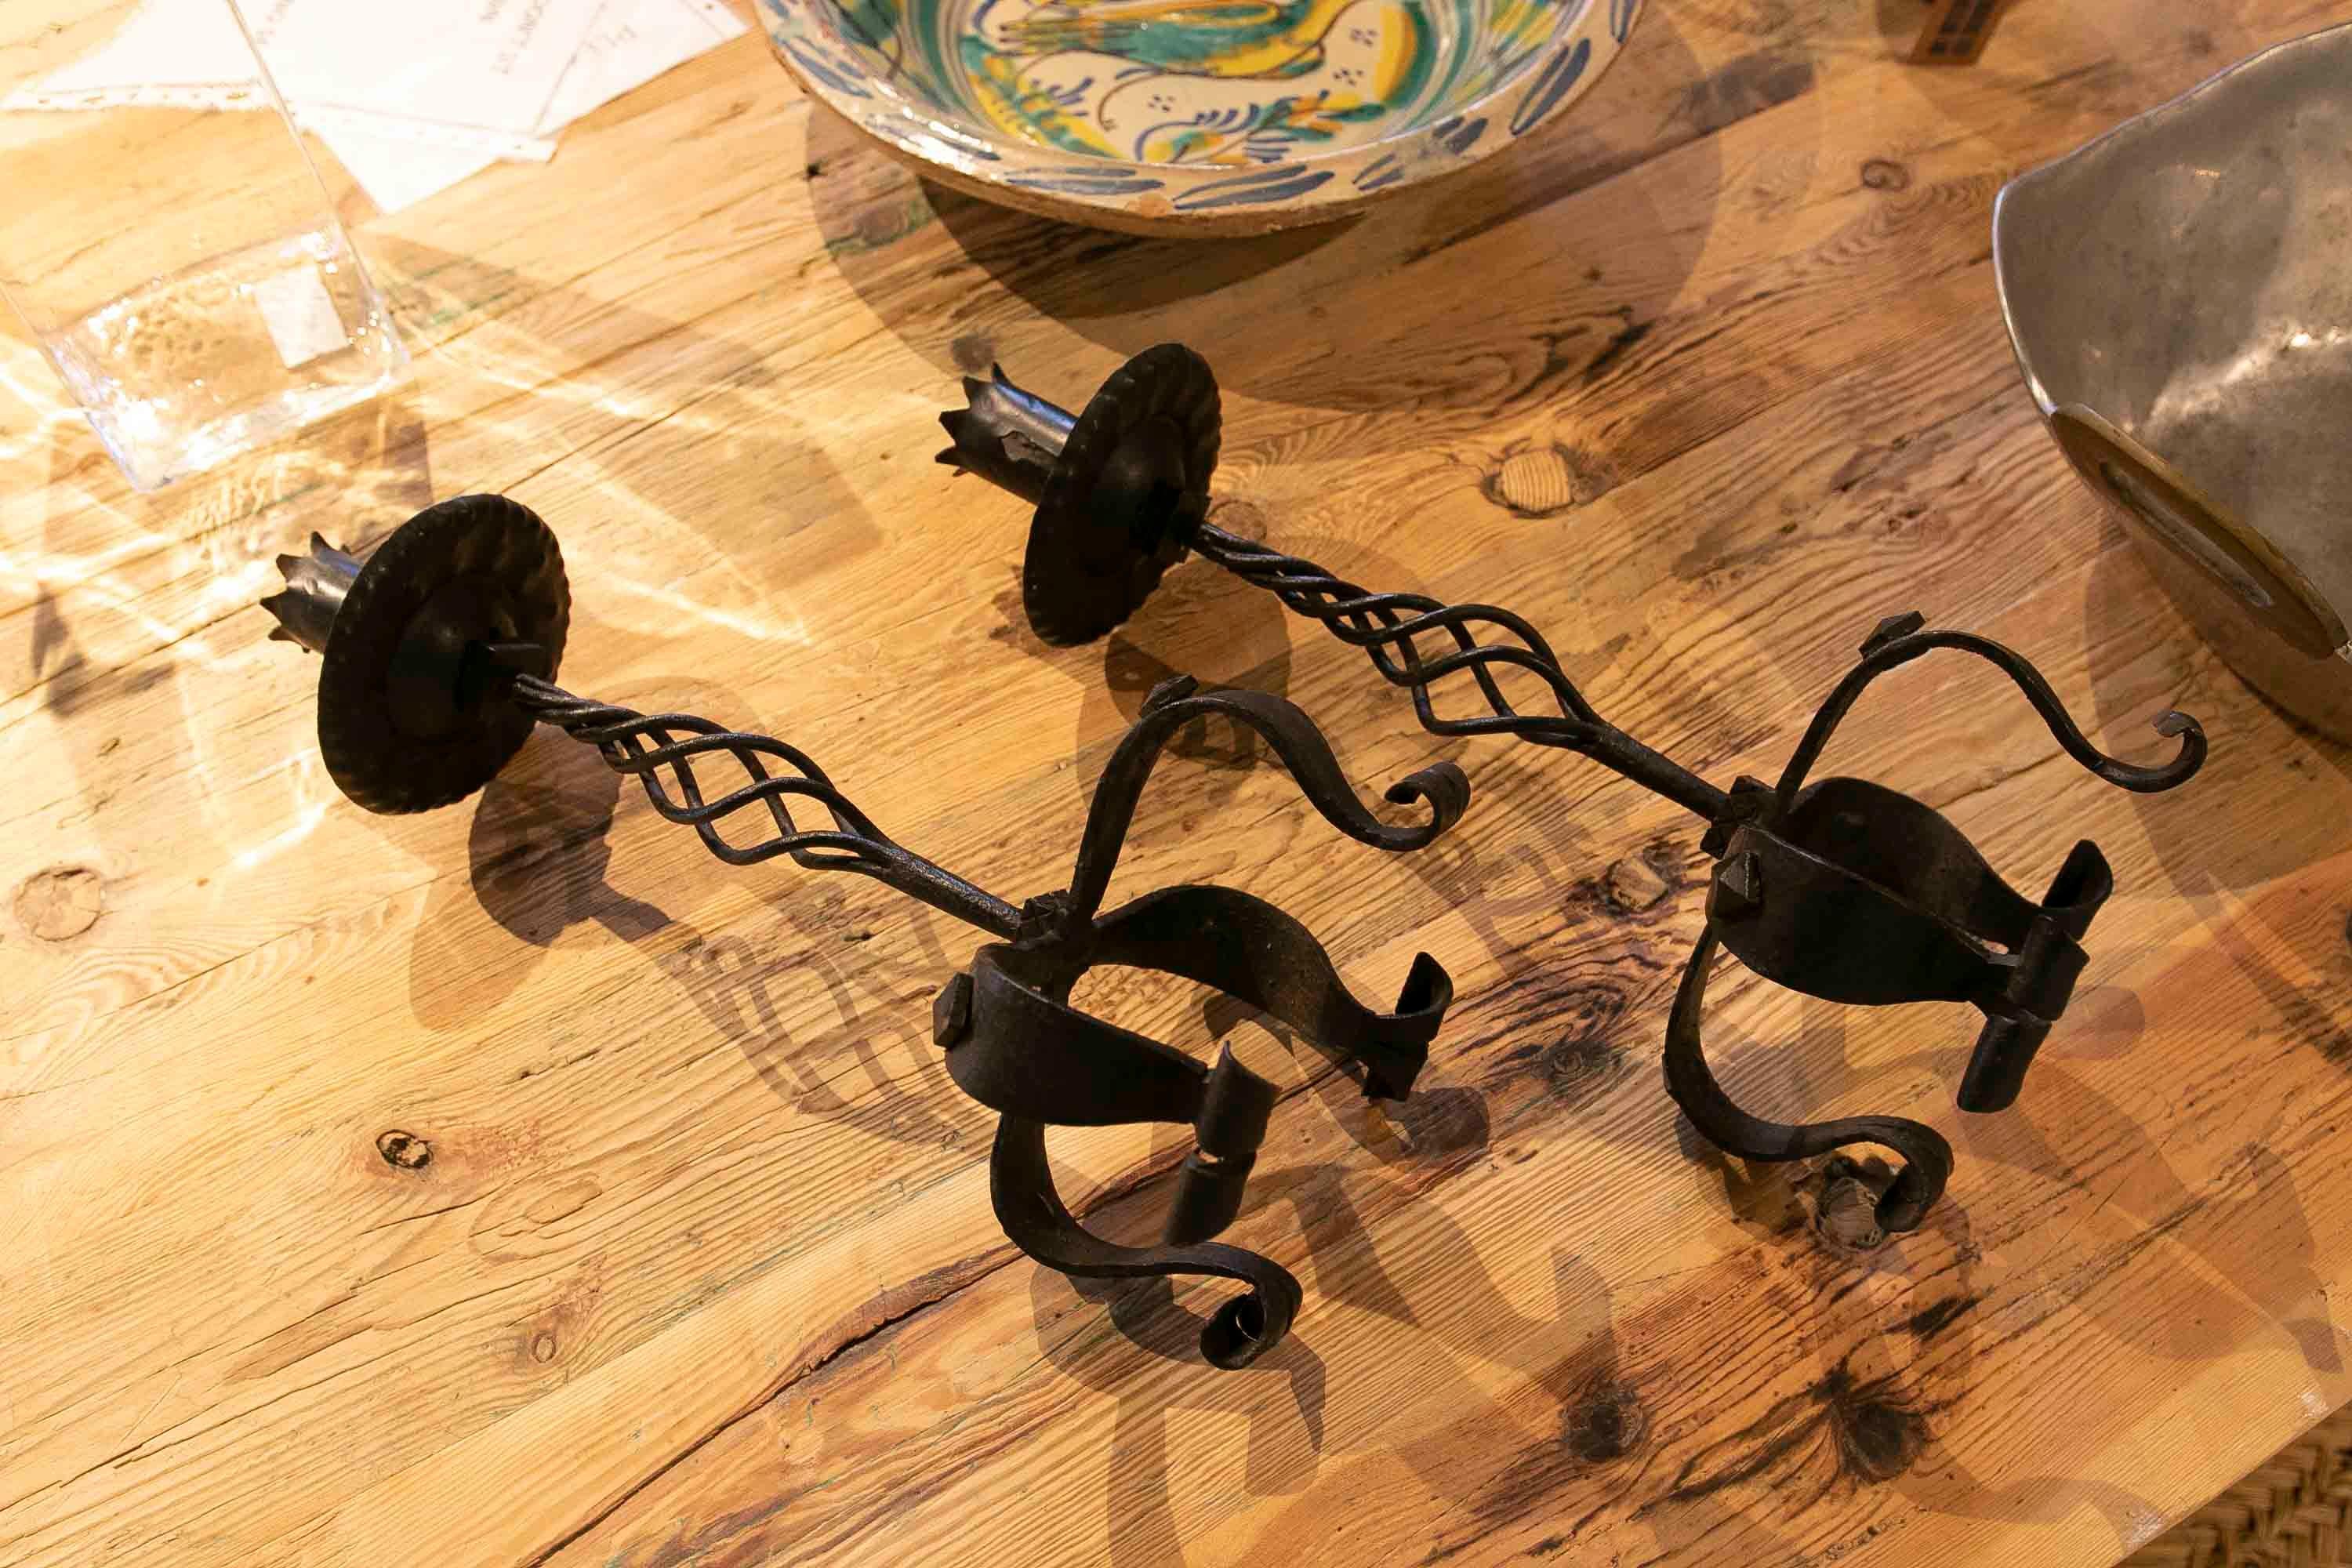 Spanish Pair of Iron Candlesticks with Four Legs For Sale 7